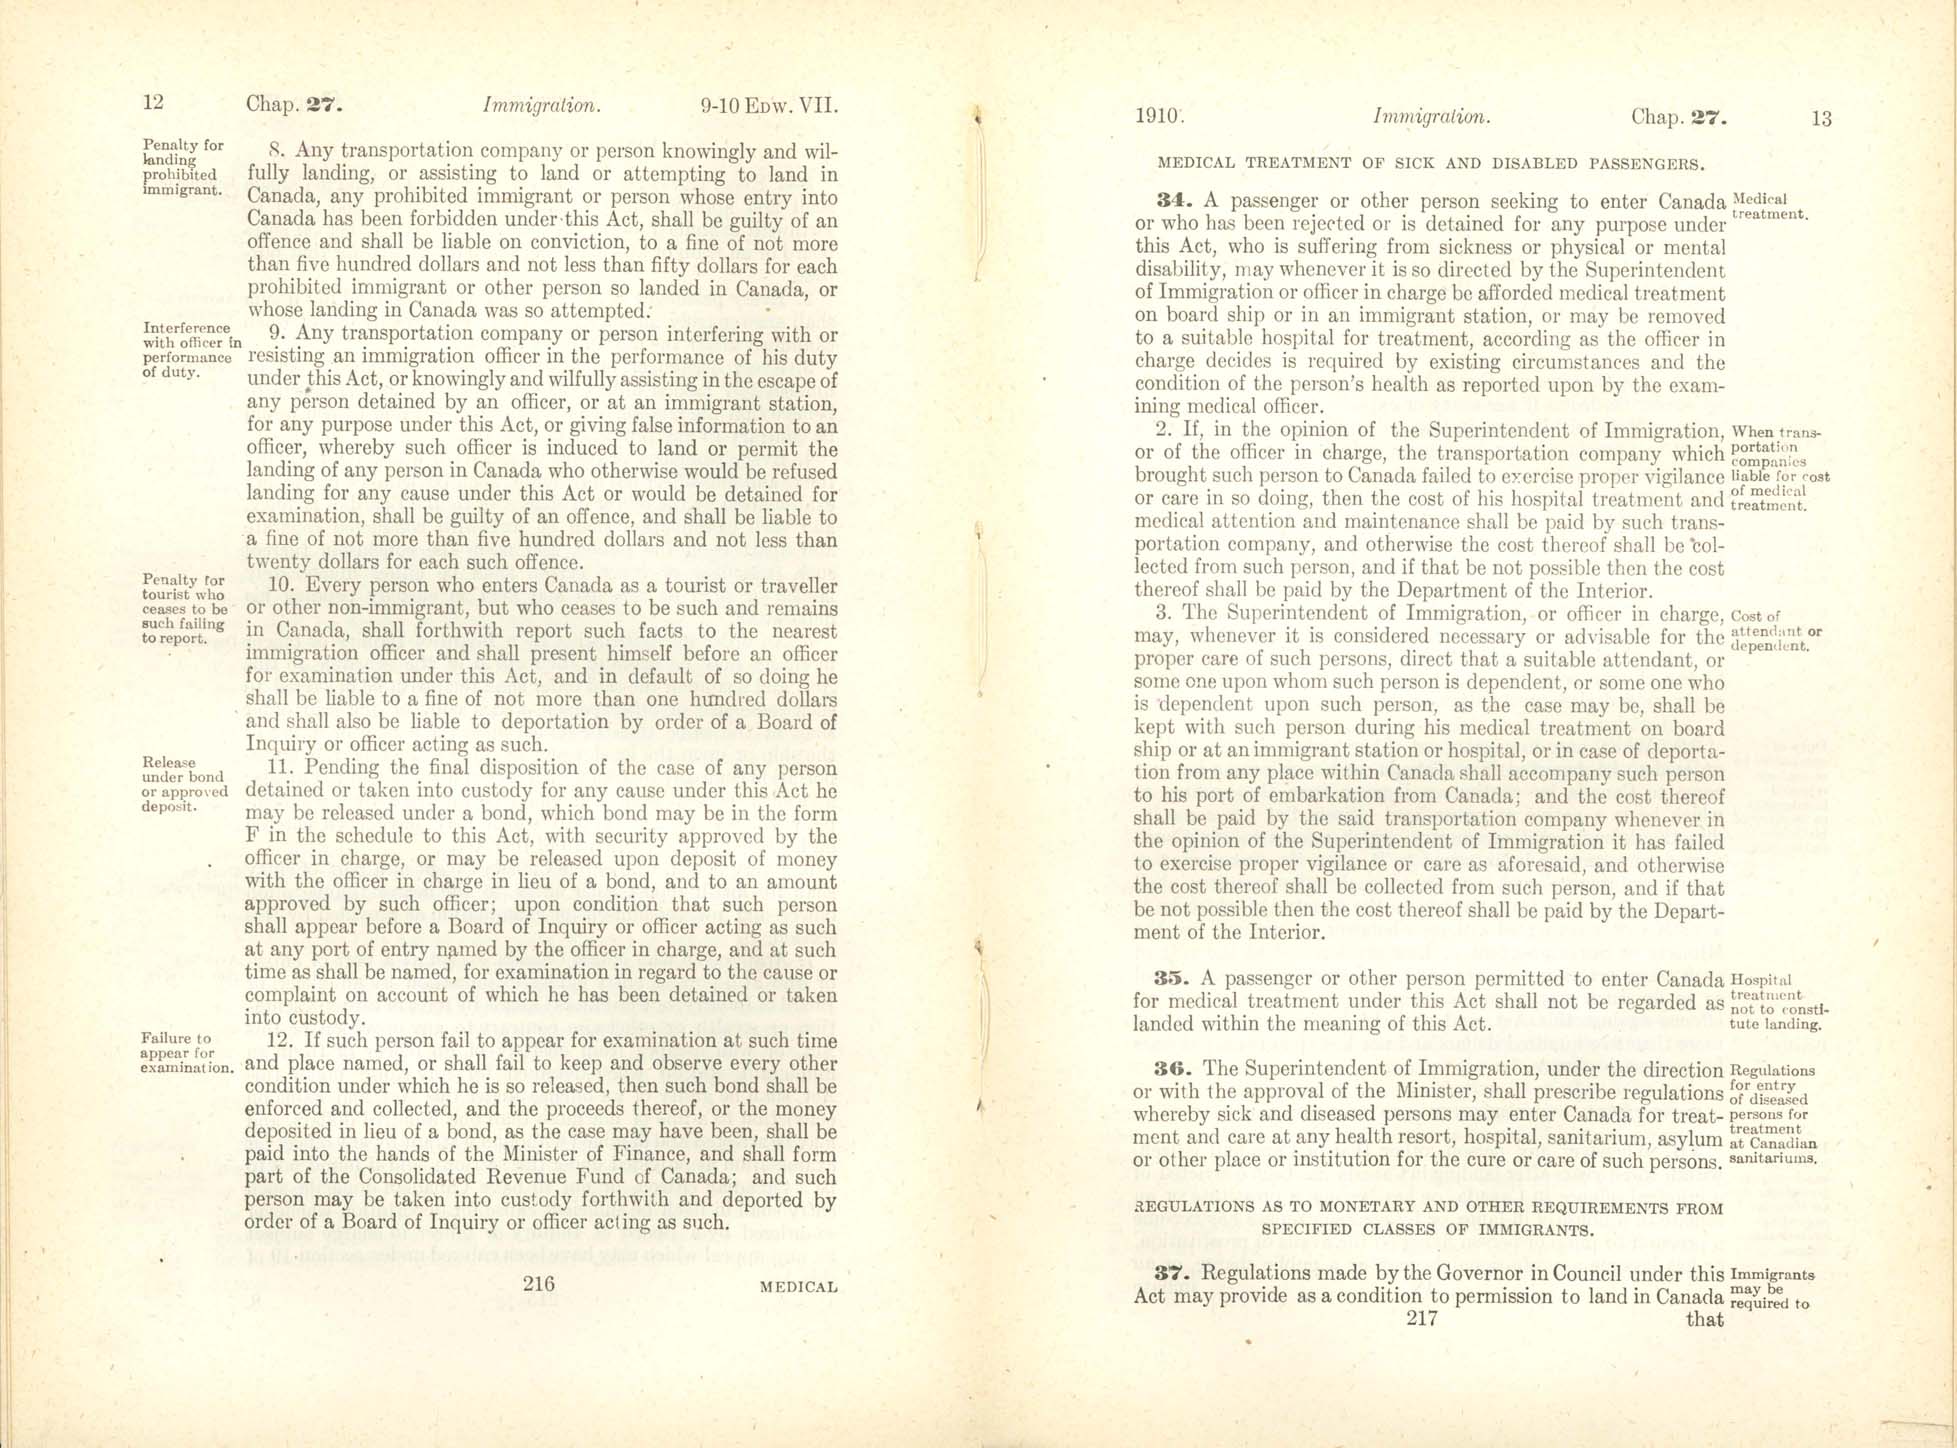 Chap. 27 Page 216, 217 Immigration Act, 1910